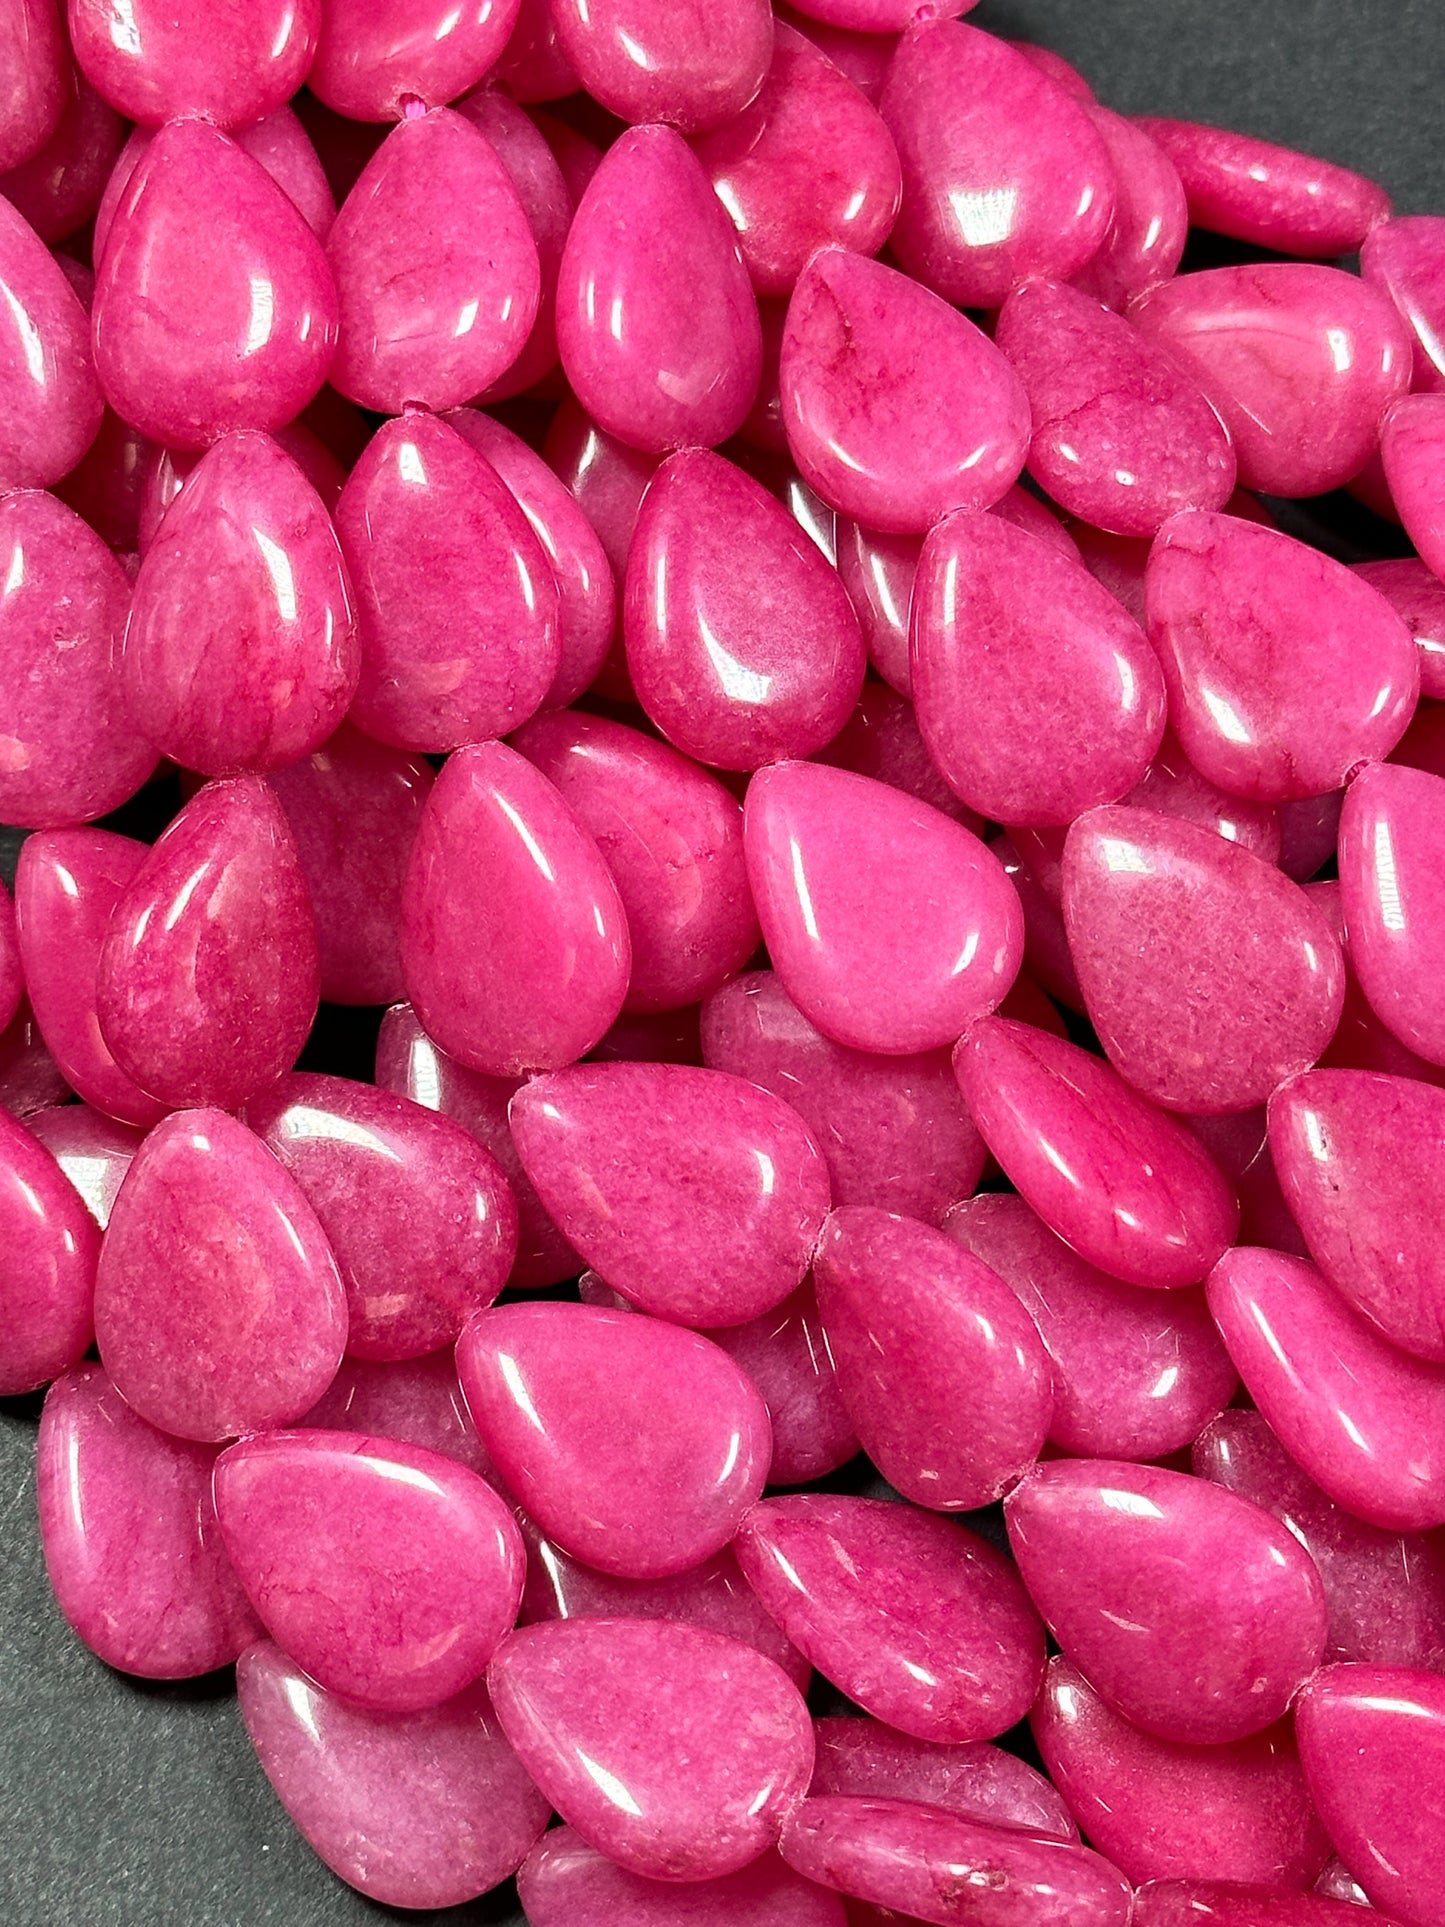 Natural Pink Jade Gemstone Bead 20x15mm Teardrop Shape, Beautiful Hot Pink Color Jade Gemstone Bead Excellent Quality Full Strand 15.5"